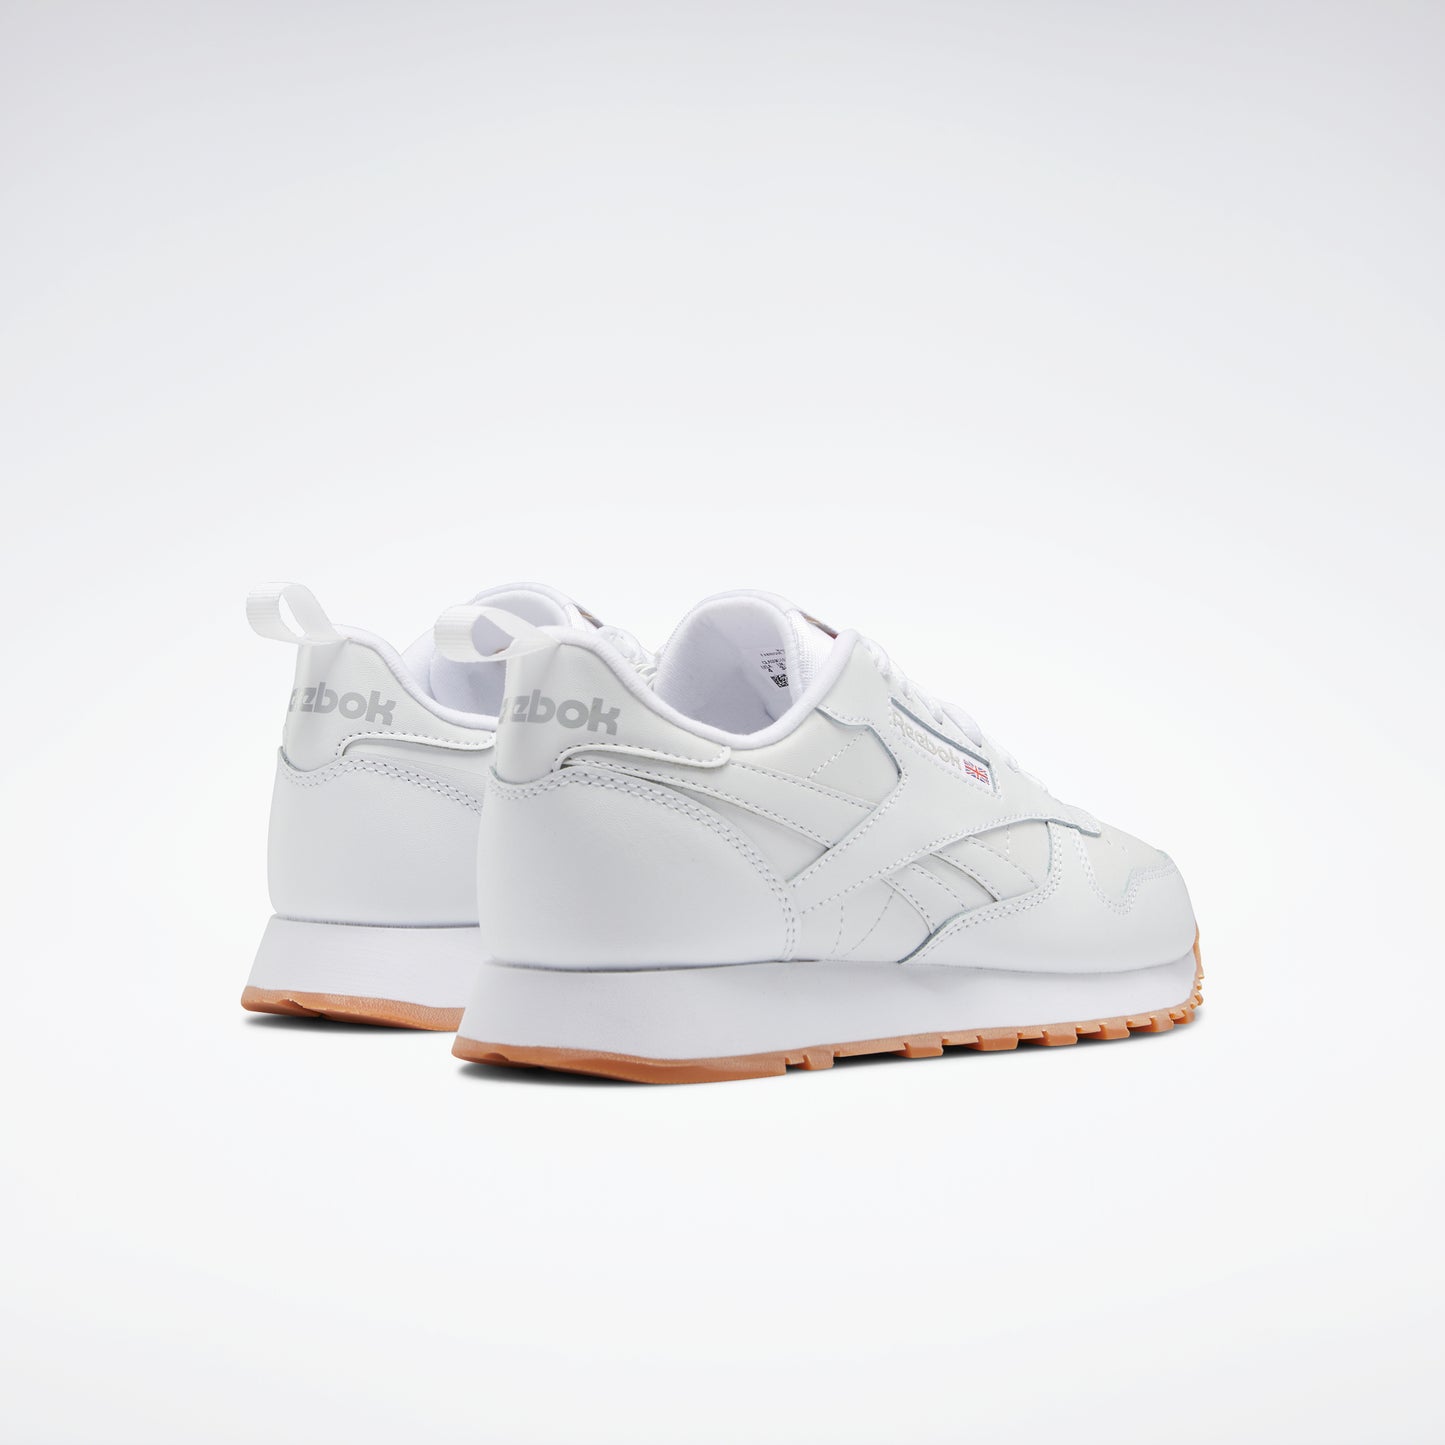 Chaussures Reebok Footwear Kids Classic Leather Equal Fit Chaussures Junior Ftwr White/Ftwr White/Pure Gre